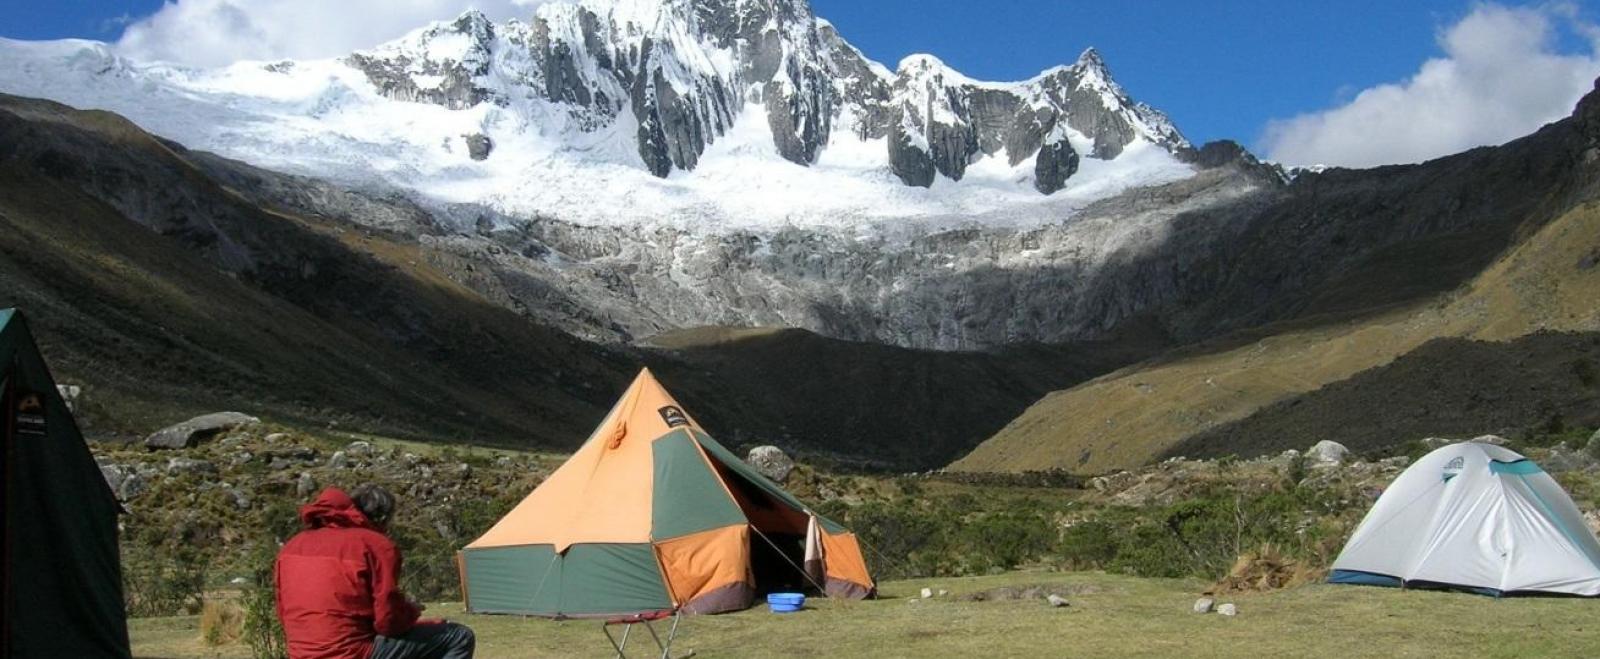 Joanne camping at the foothills of the Himalayan Mountains